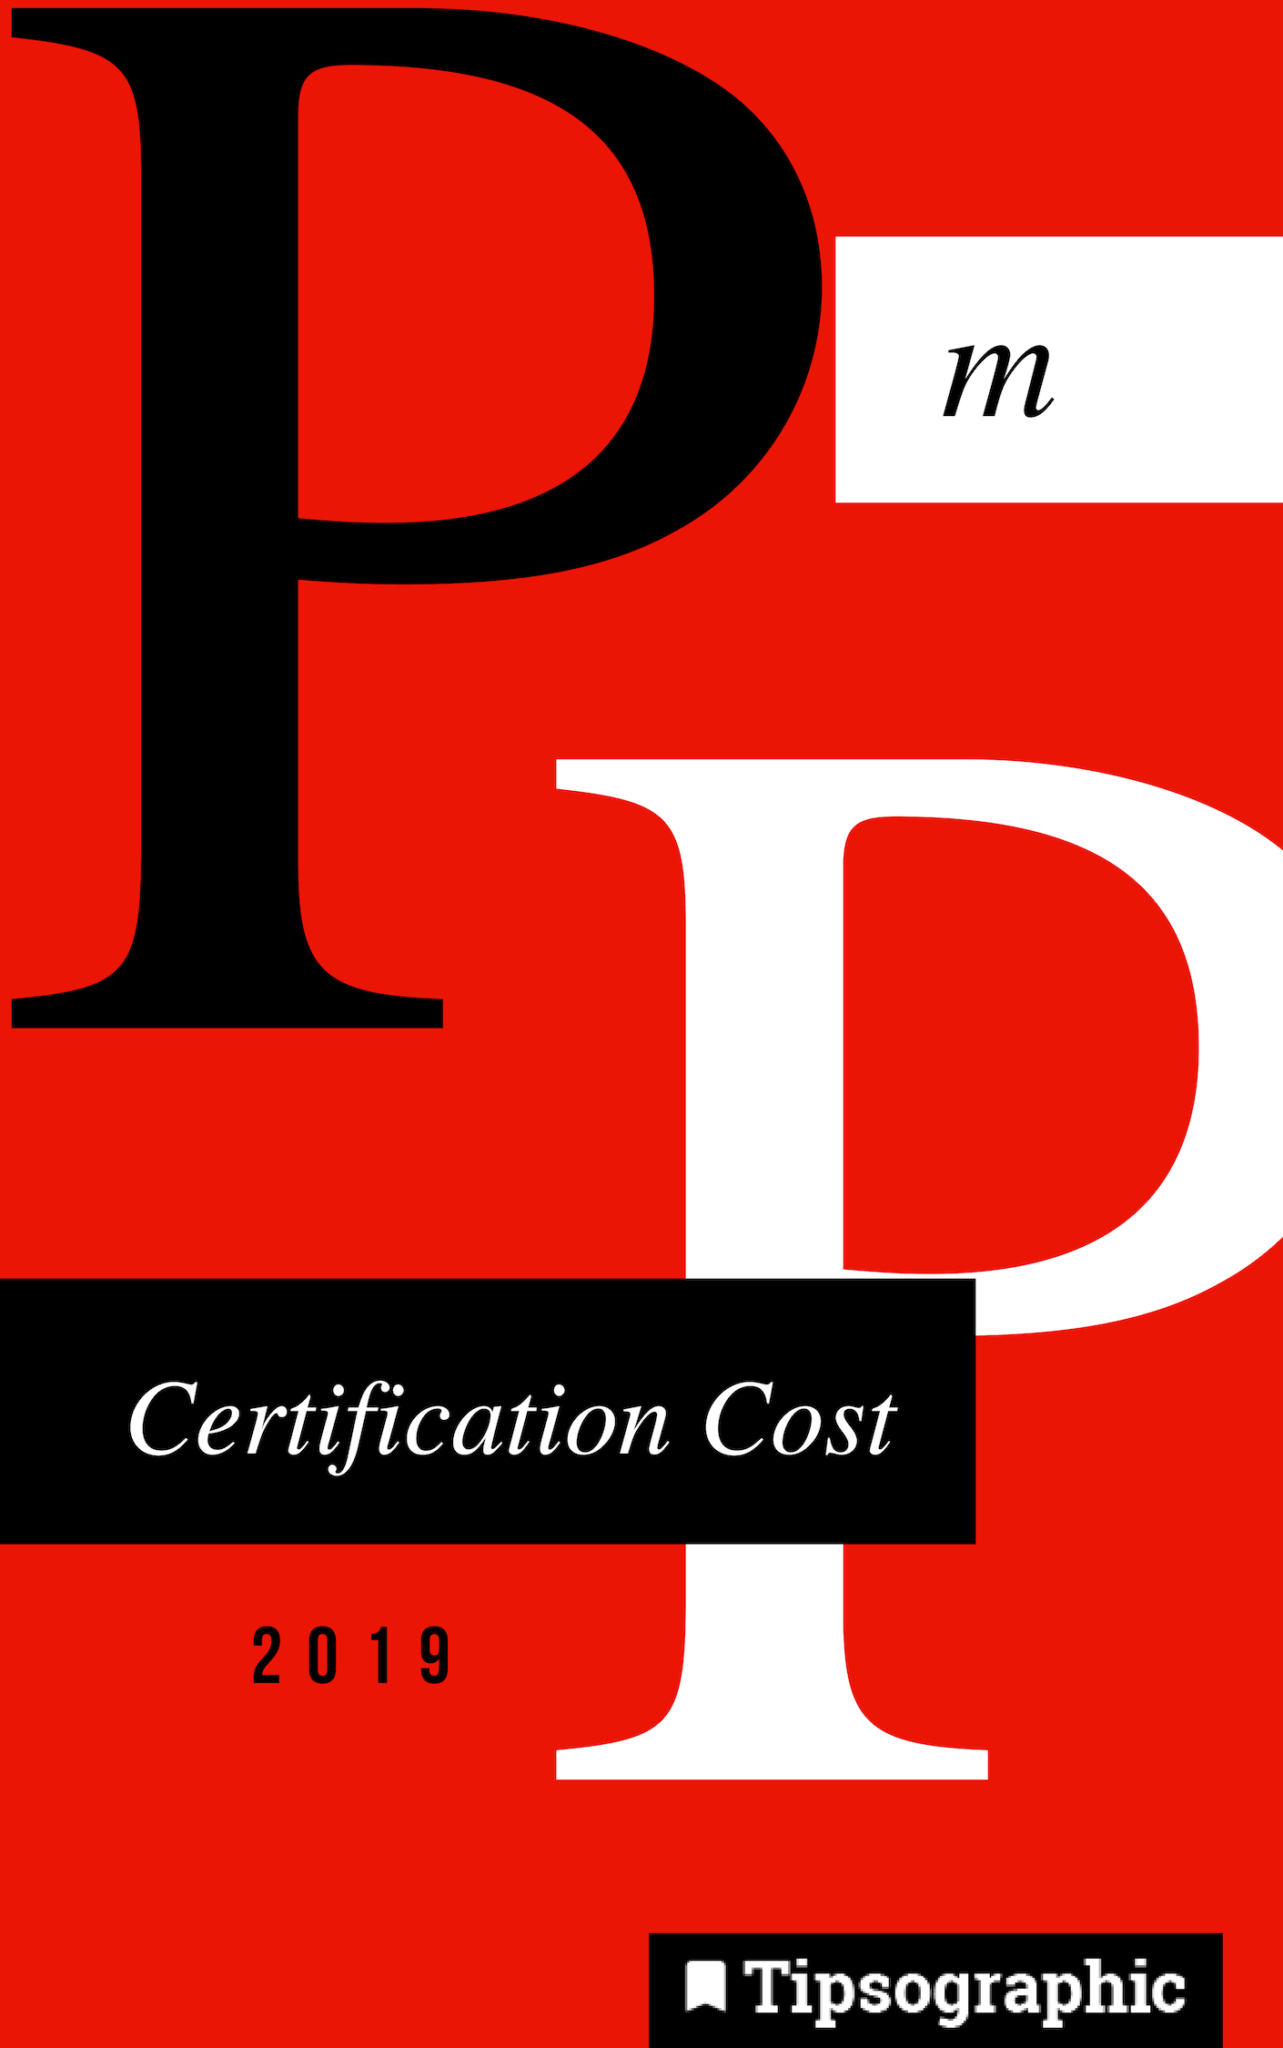 pmp certification fees